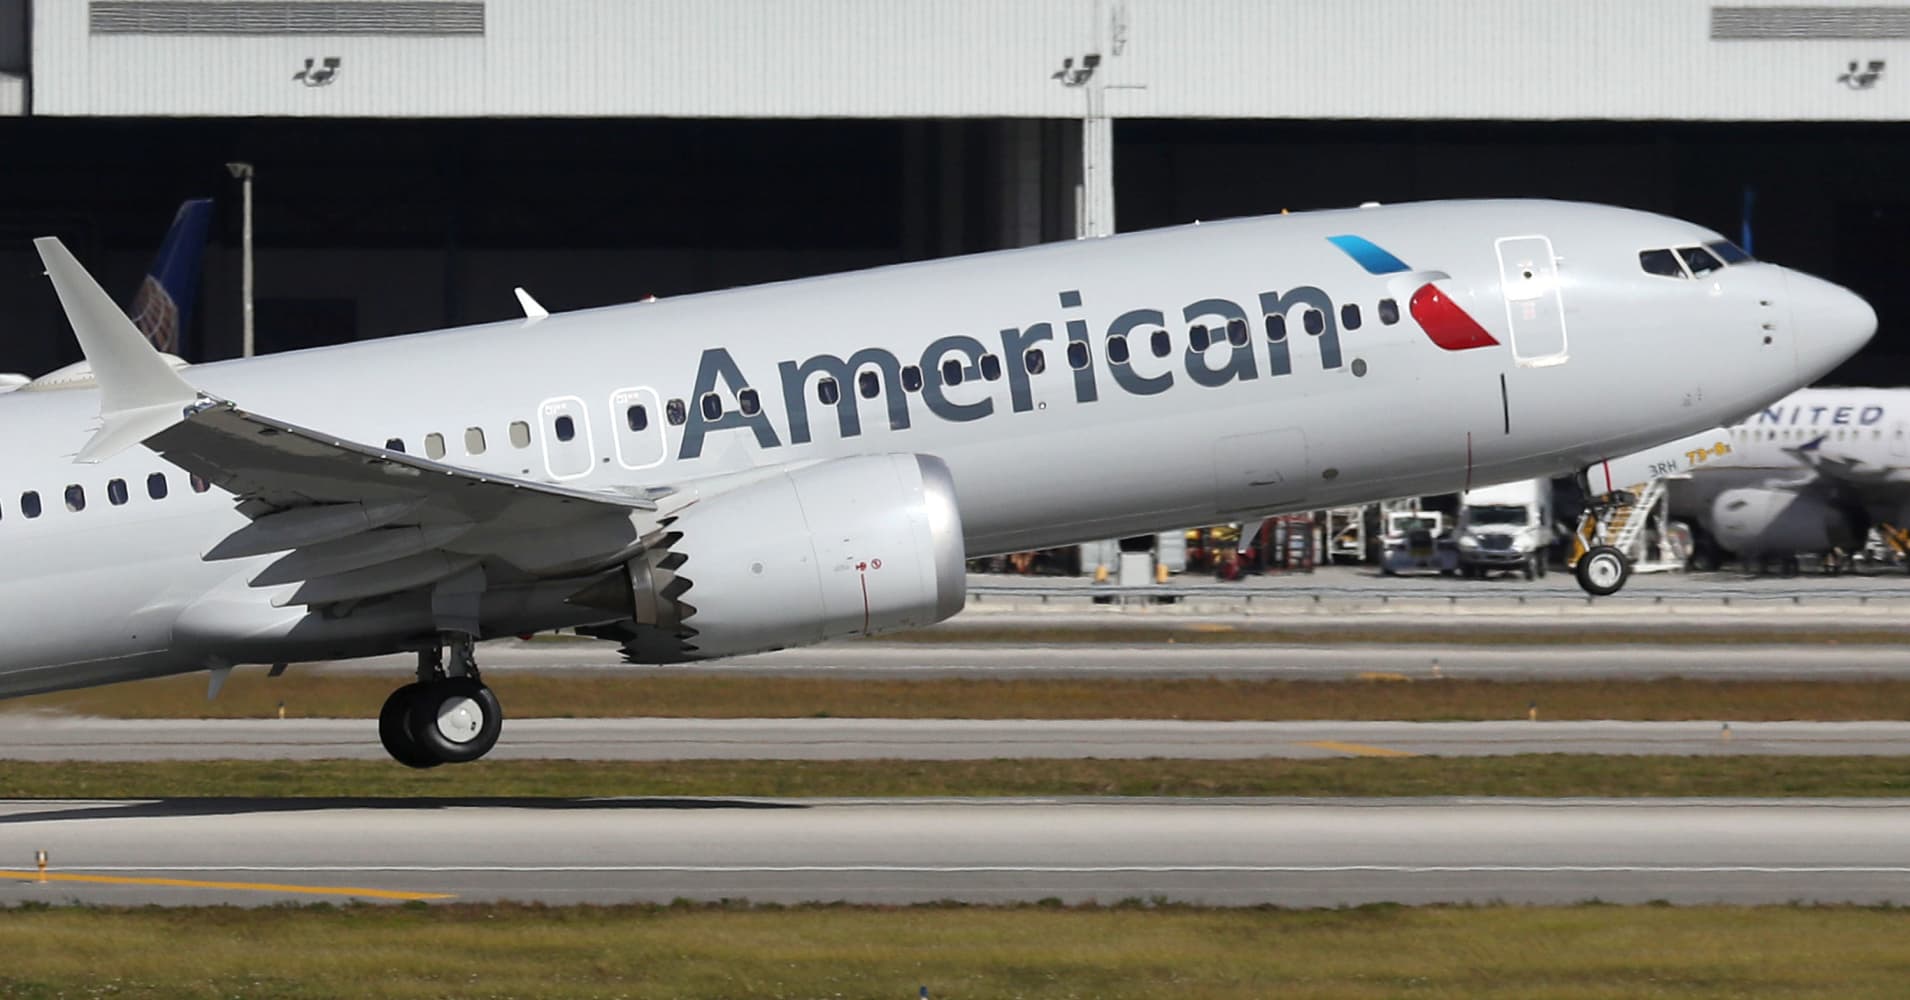 american orders 260 new planes, including boeing max 10s, and plans bigger first class